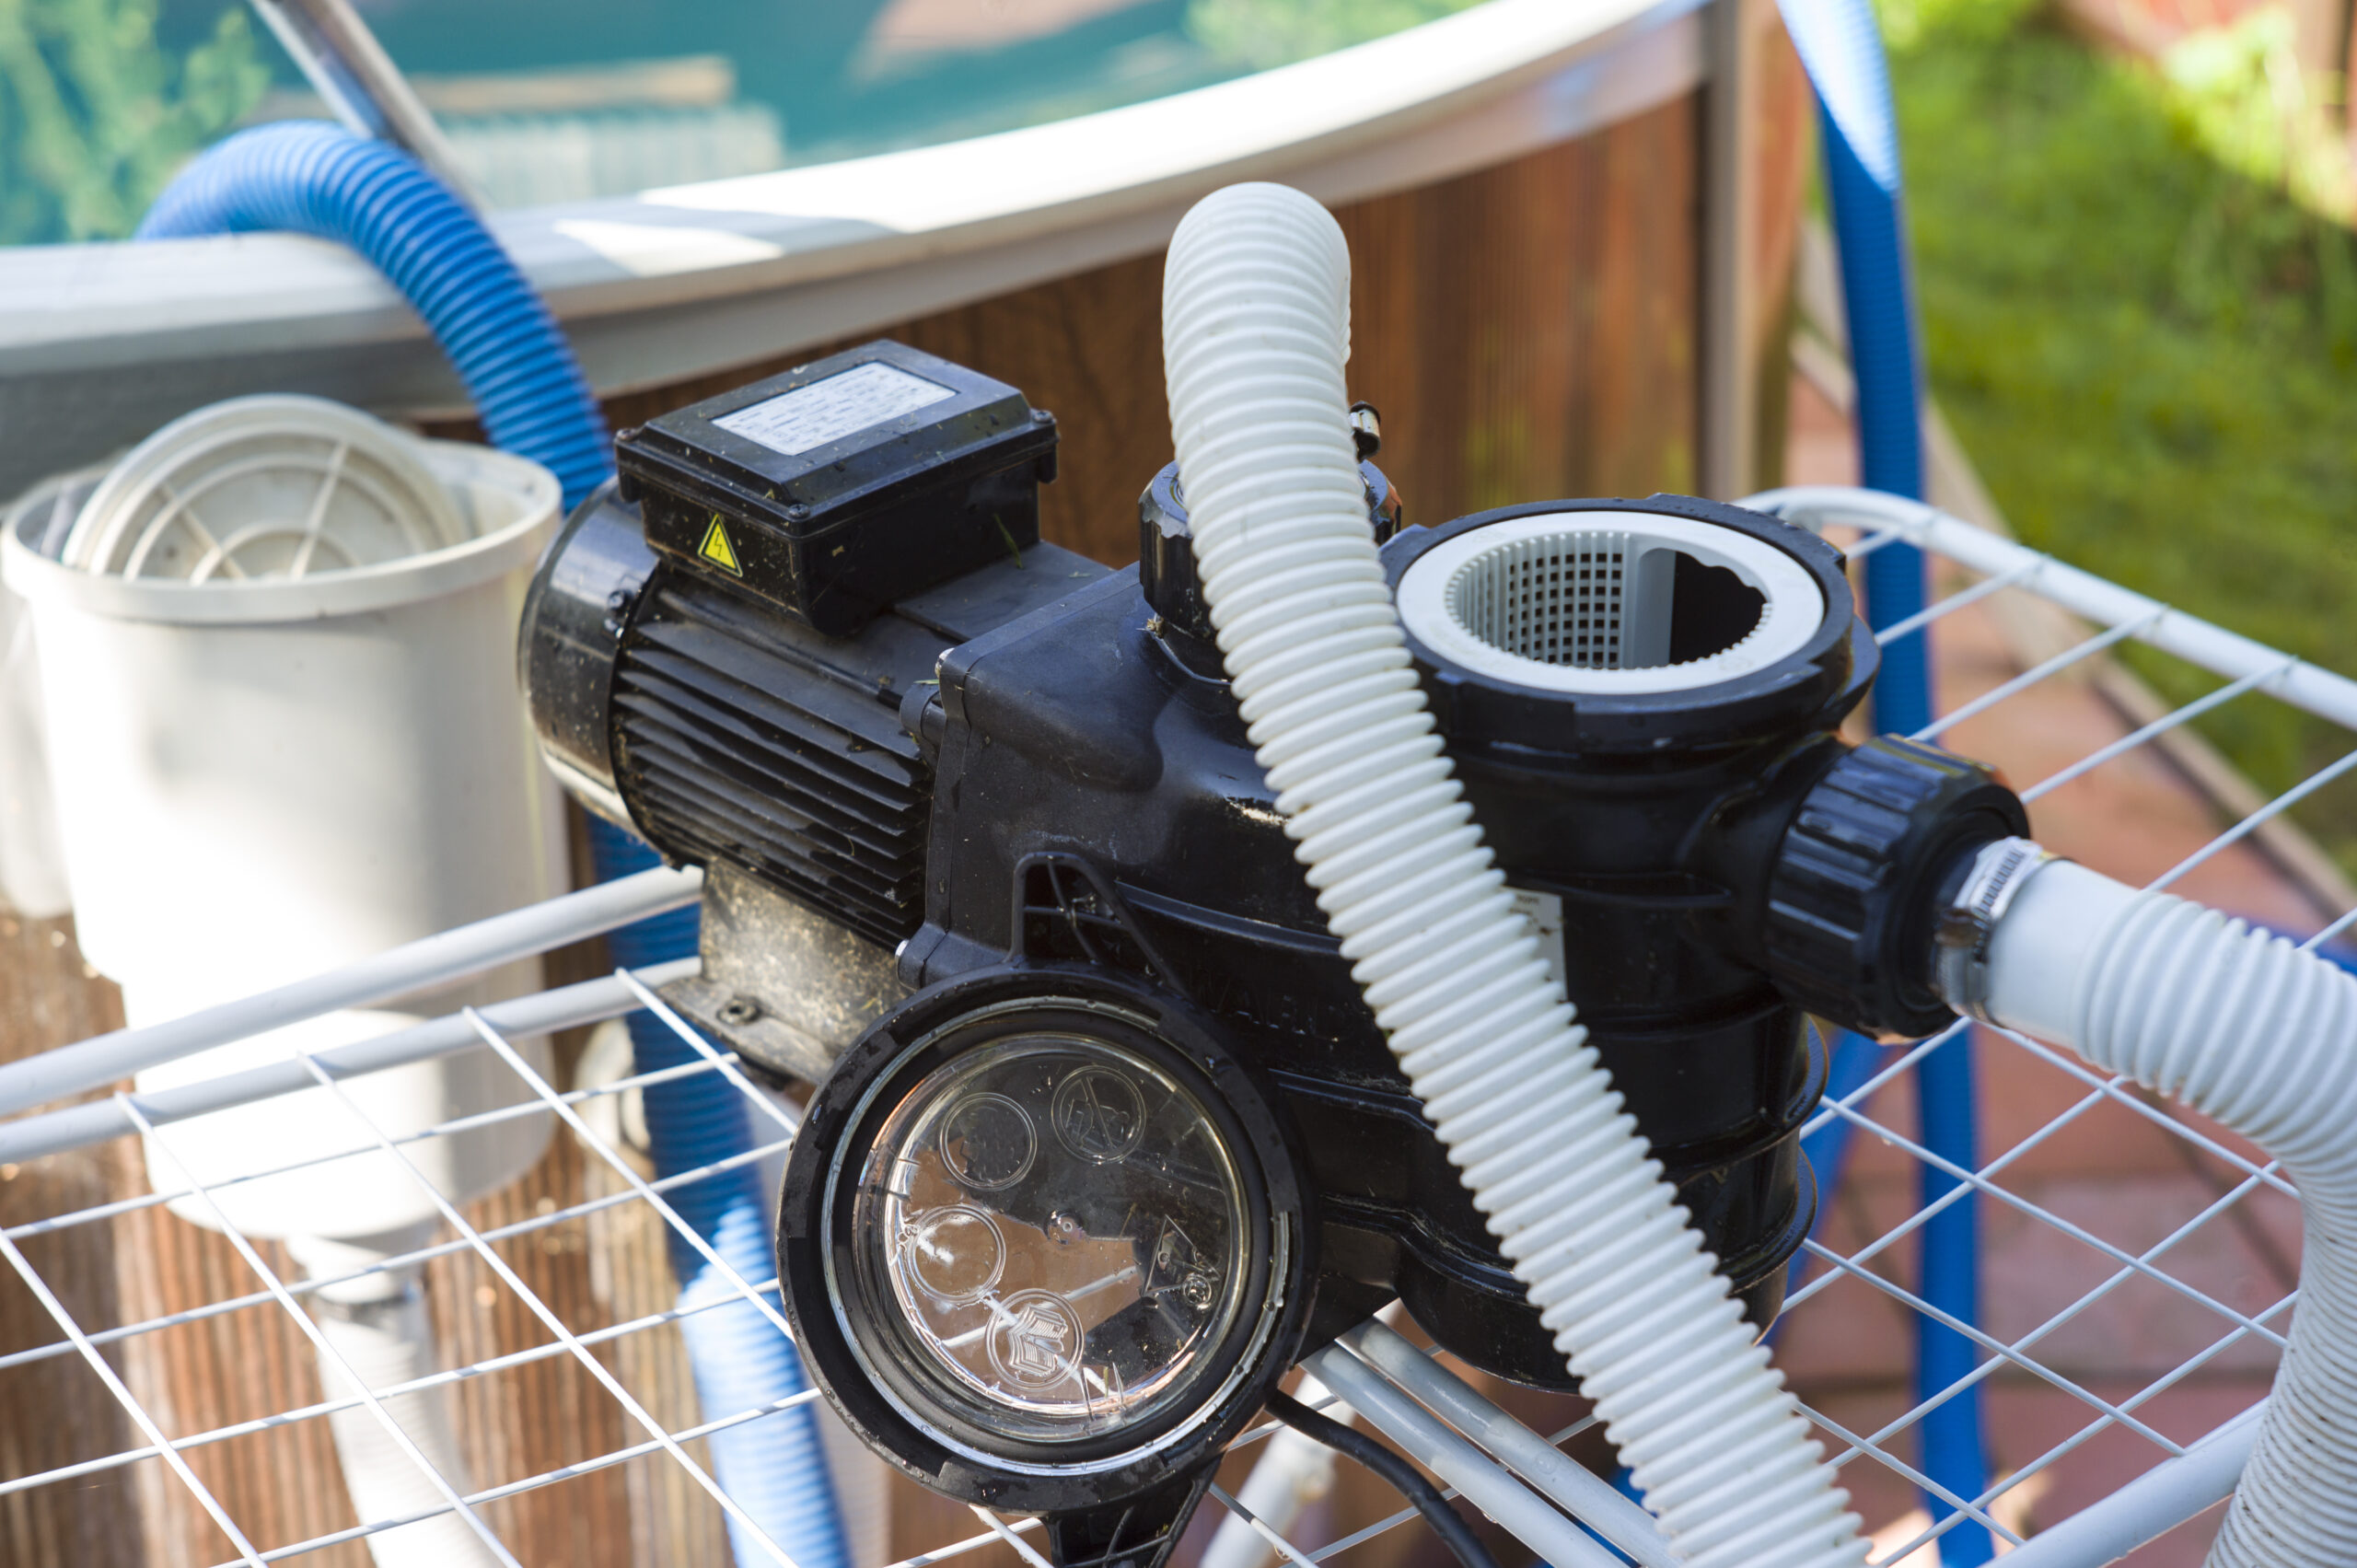 A water filter machine for a pool, an essential piece of equipment responsible for removing impurities, debris, and contaminants from the pool water, ensuring it remains clean and safe for swimming.